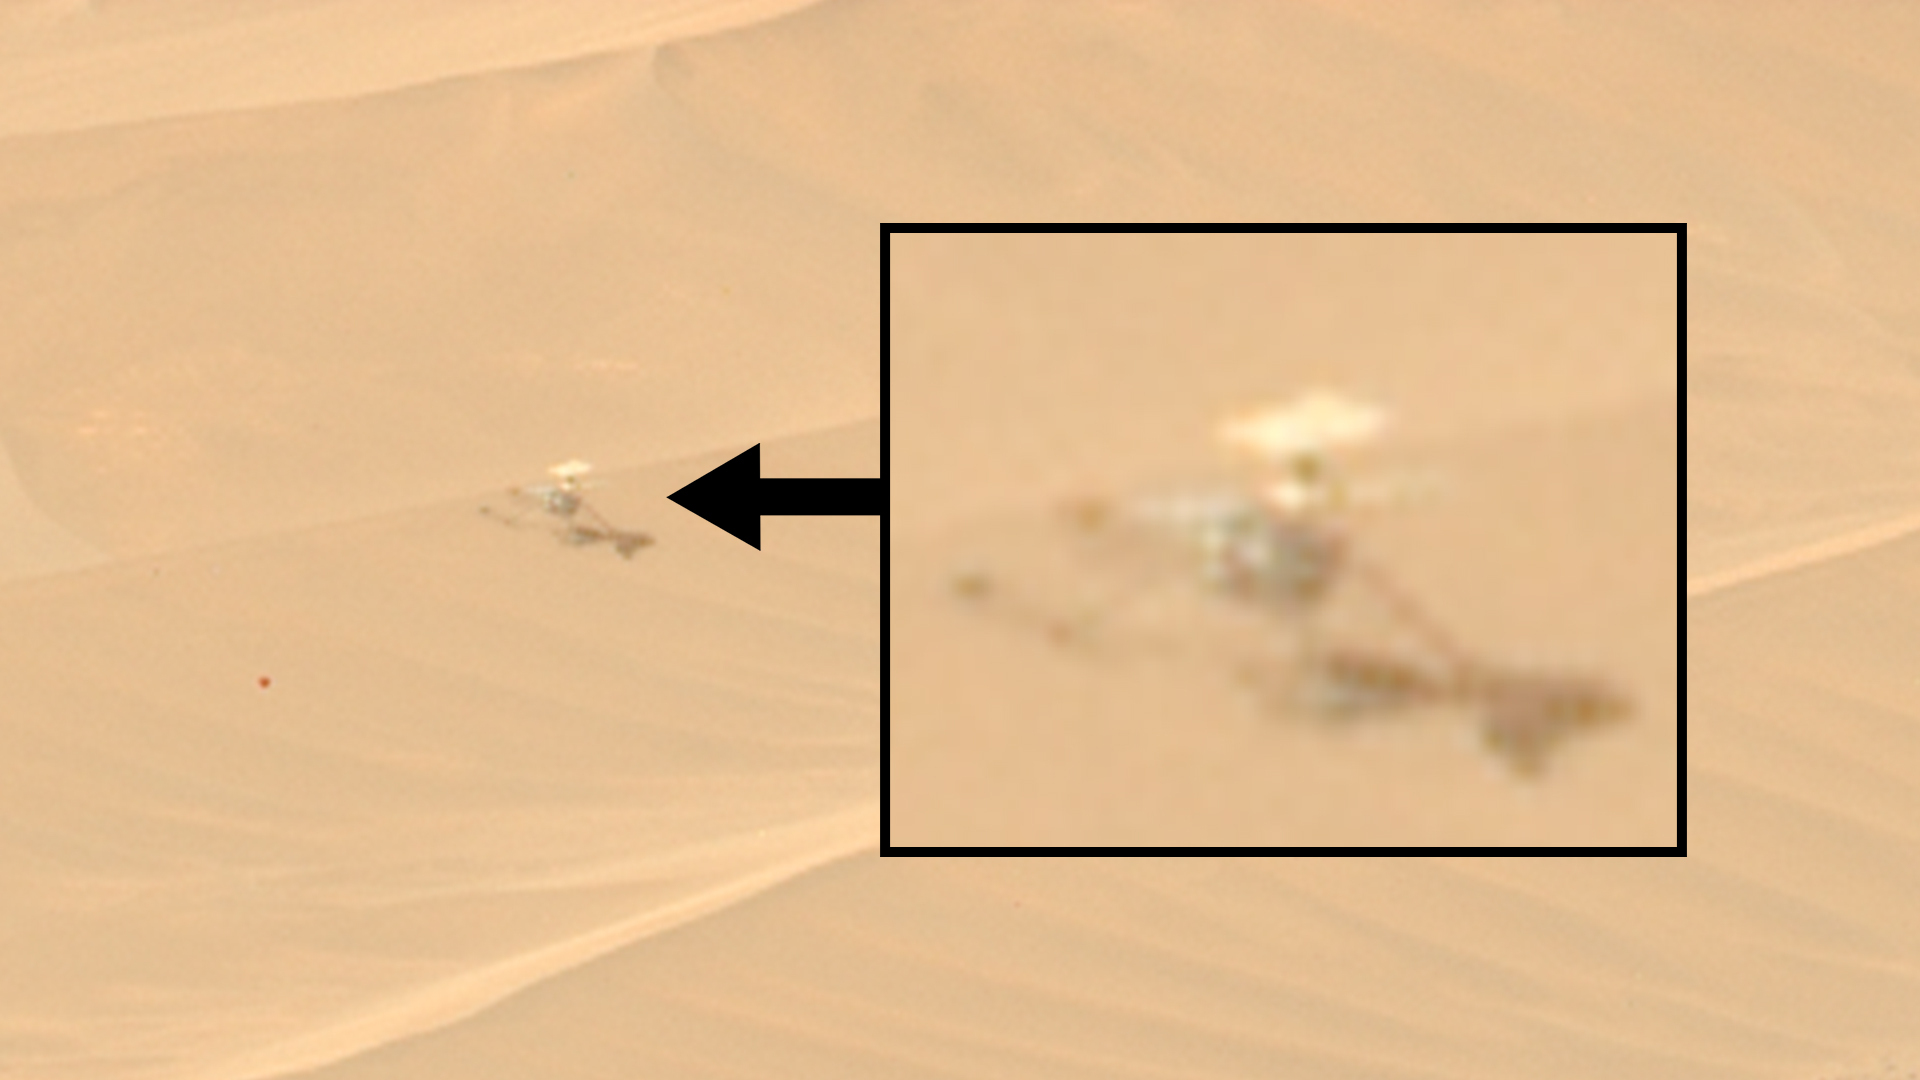 a small helicopter-like drone can be seen motionless on a reddish-orange sand dune